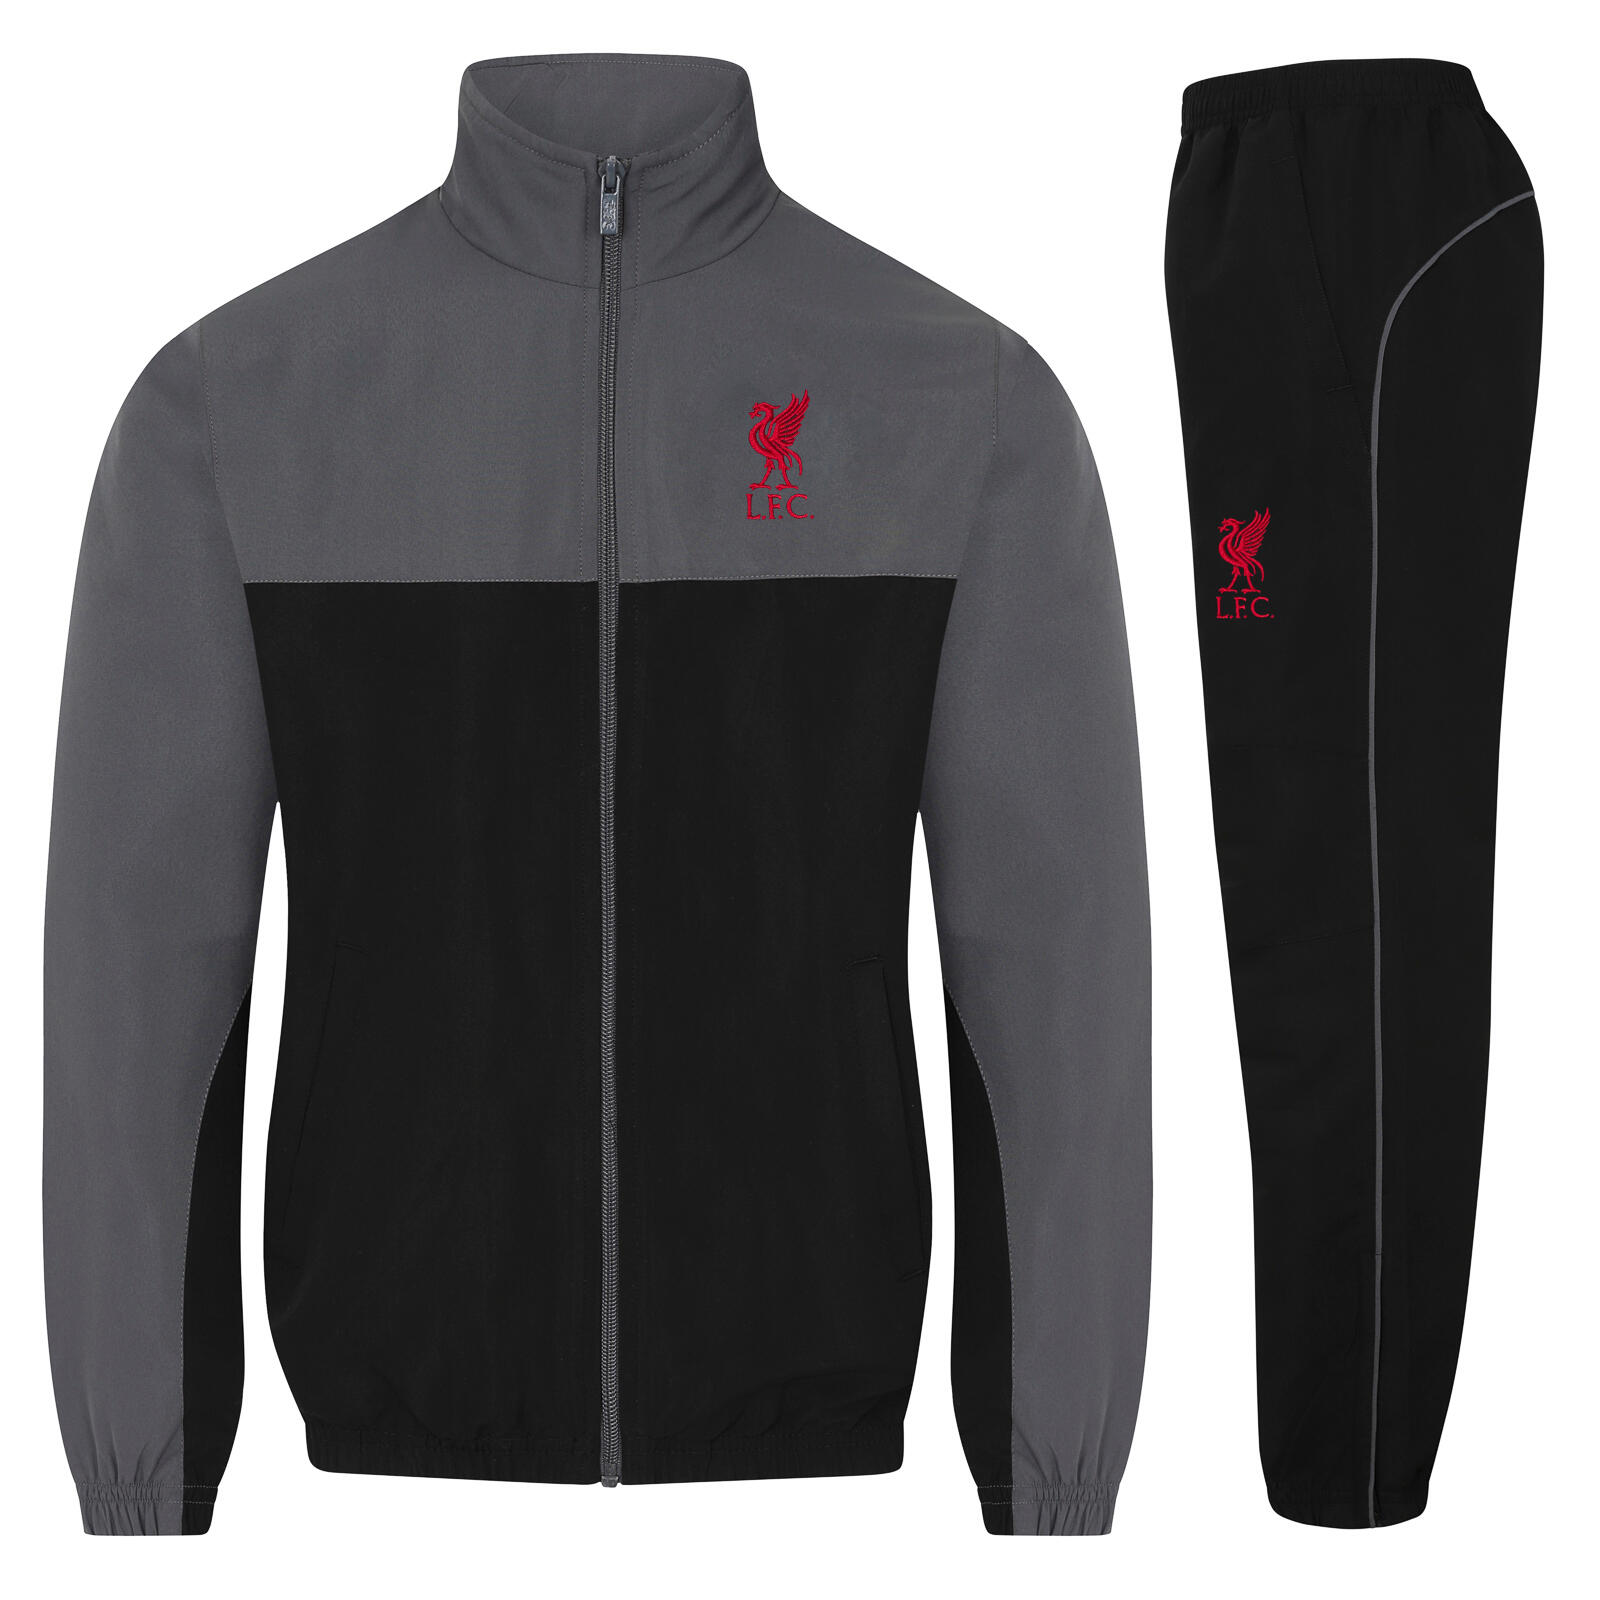 LIVERPOOL FC Liverpool FC Mens Tracksuit Jacket & Pants Set OFFICIAL Football Gift